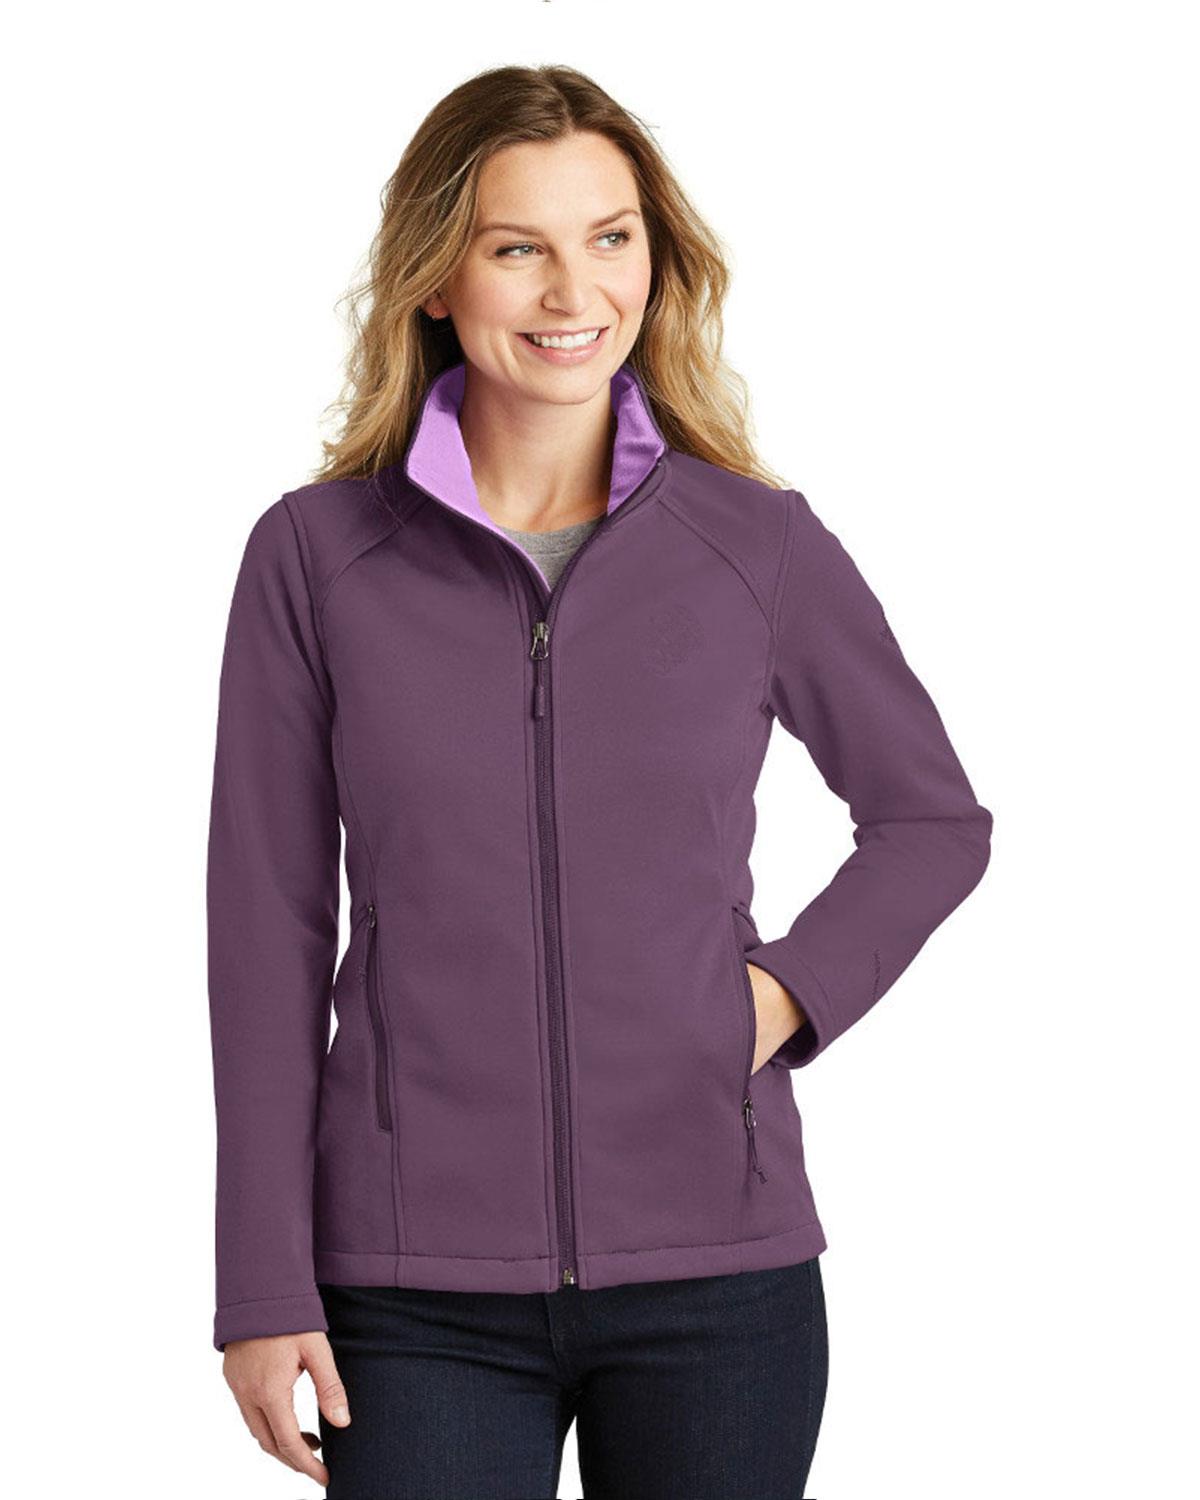 The North Face NF0A3LGY Women Jacket